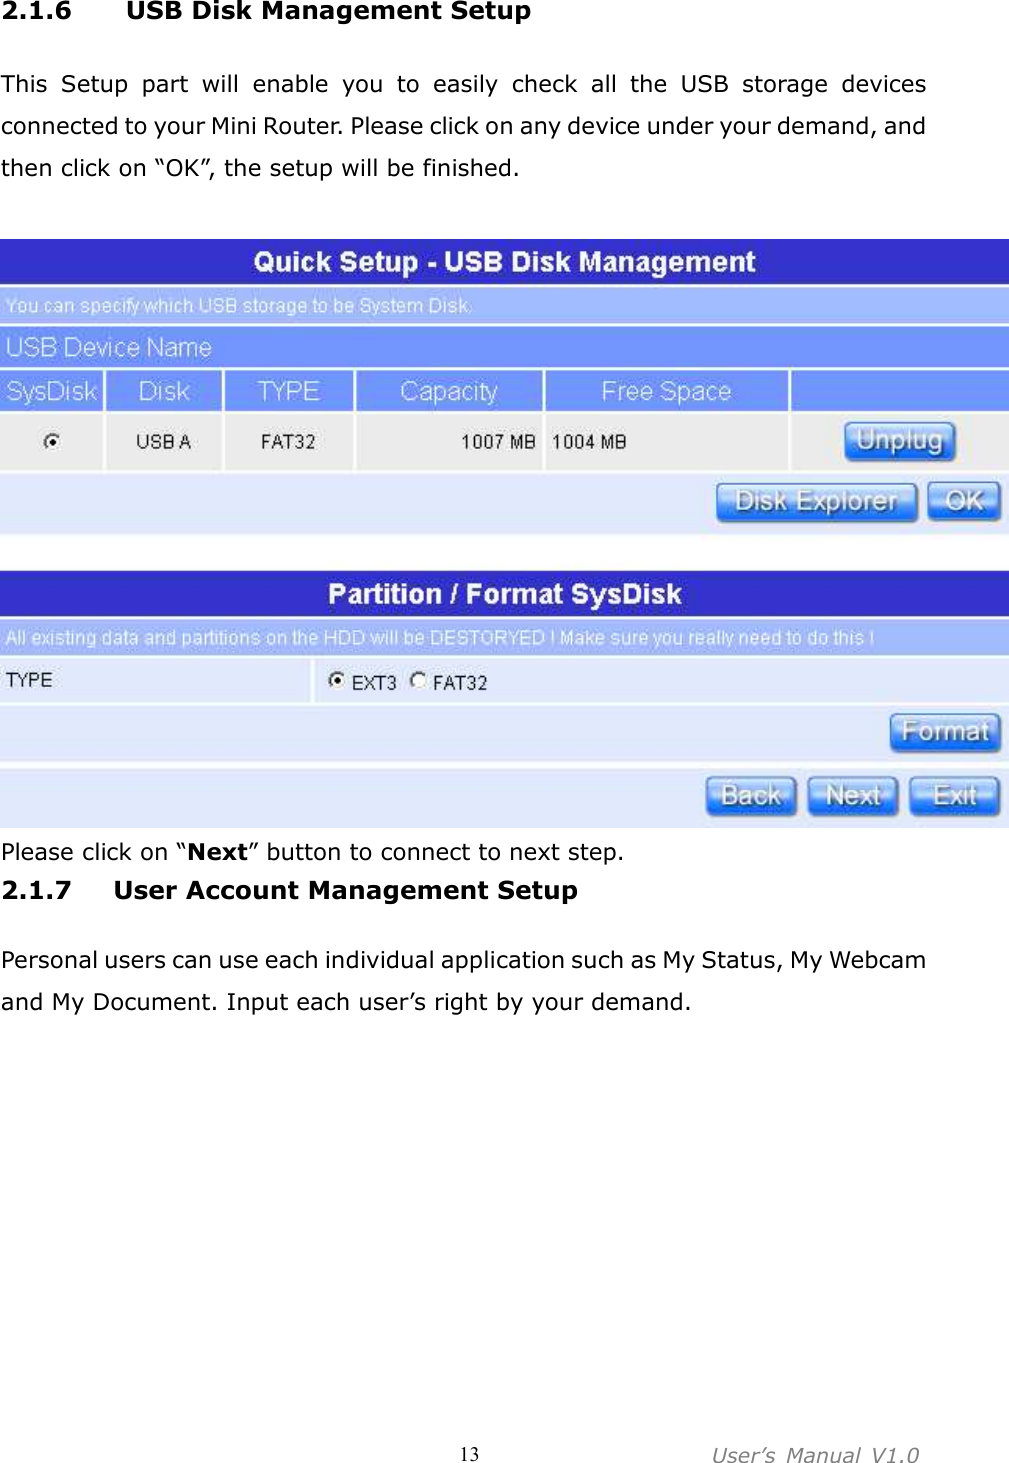 User’s  Manual  V1.0  132.1.6   USB Disk Management Setup  This  Setup  part  will  enable  you  to  easily  check  all  the  USB  storage  devices connected to your Mini Router. Please click on any device under your demand, and then click on “OK”, the setup will be finished.   Please click on “Next” button to connect to next step. 2.1.7 User Account Management Setup  Personal users can use each individual application such as My Status, My Webcam and My Document. Input each user’s right by your demand. 